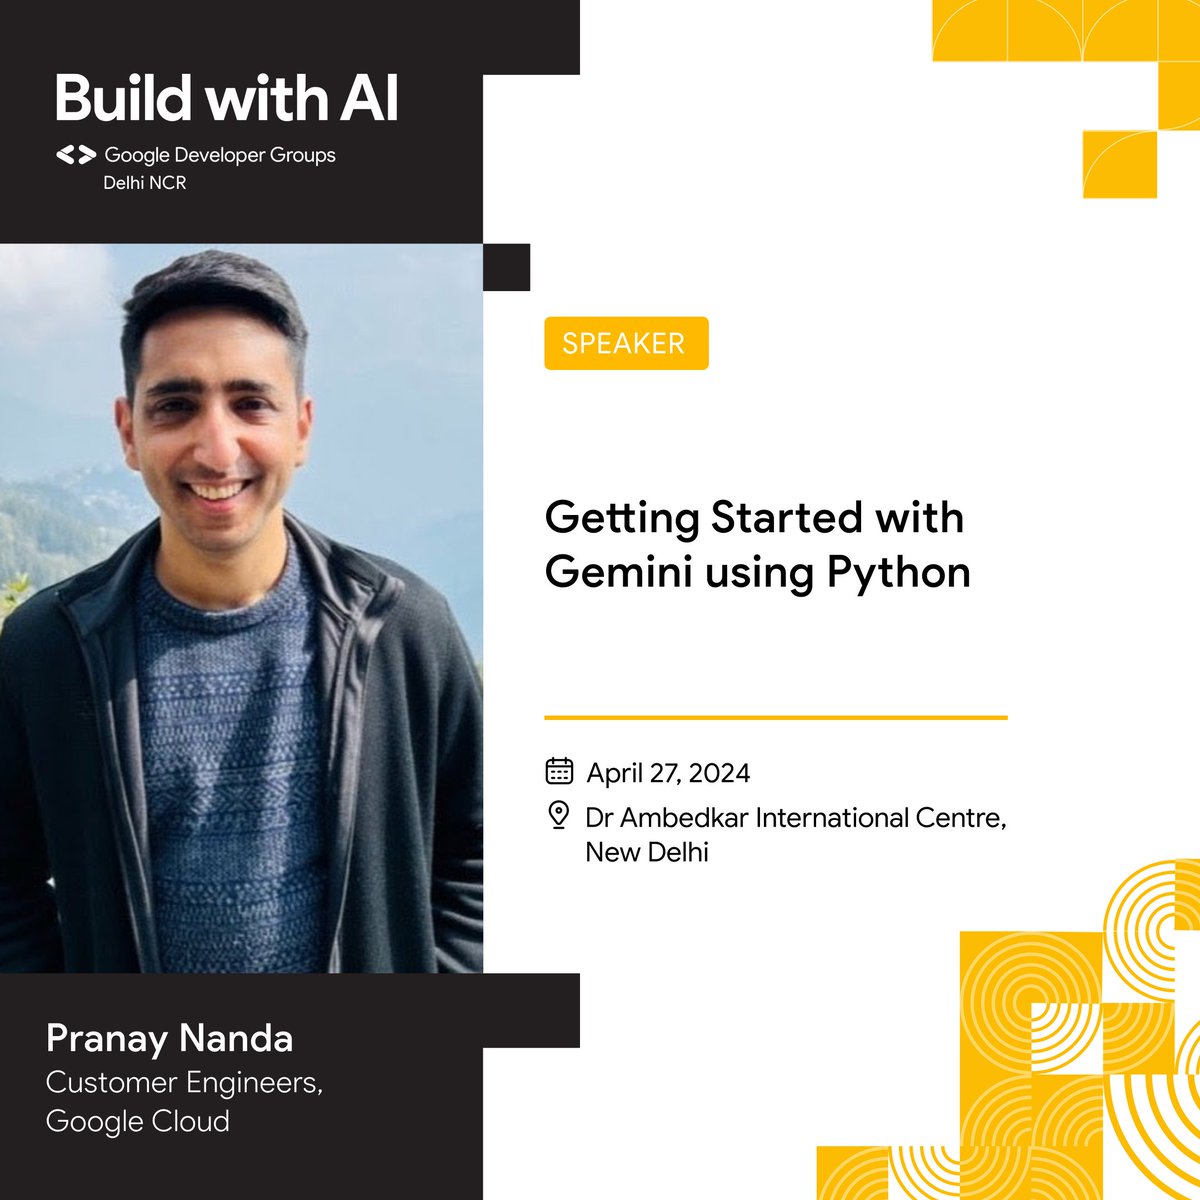 Alright coders, listen up! 👂 Pranay Nanda, a certified cloud gunslinger at Google, is about to take us on a wild ride into the mind-bending world of Gemini - Google's shiny new Generative AI toy. Using some python magic 🐍